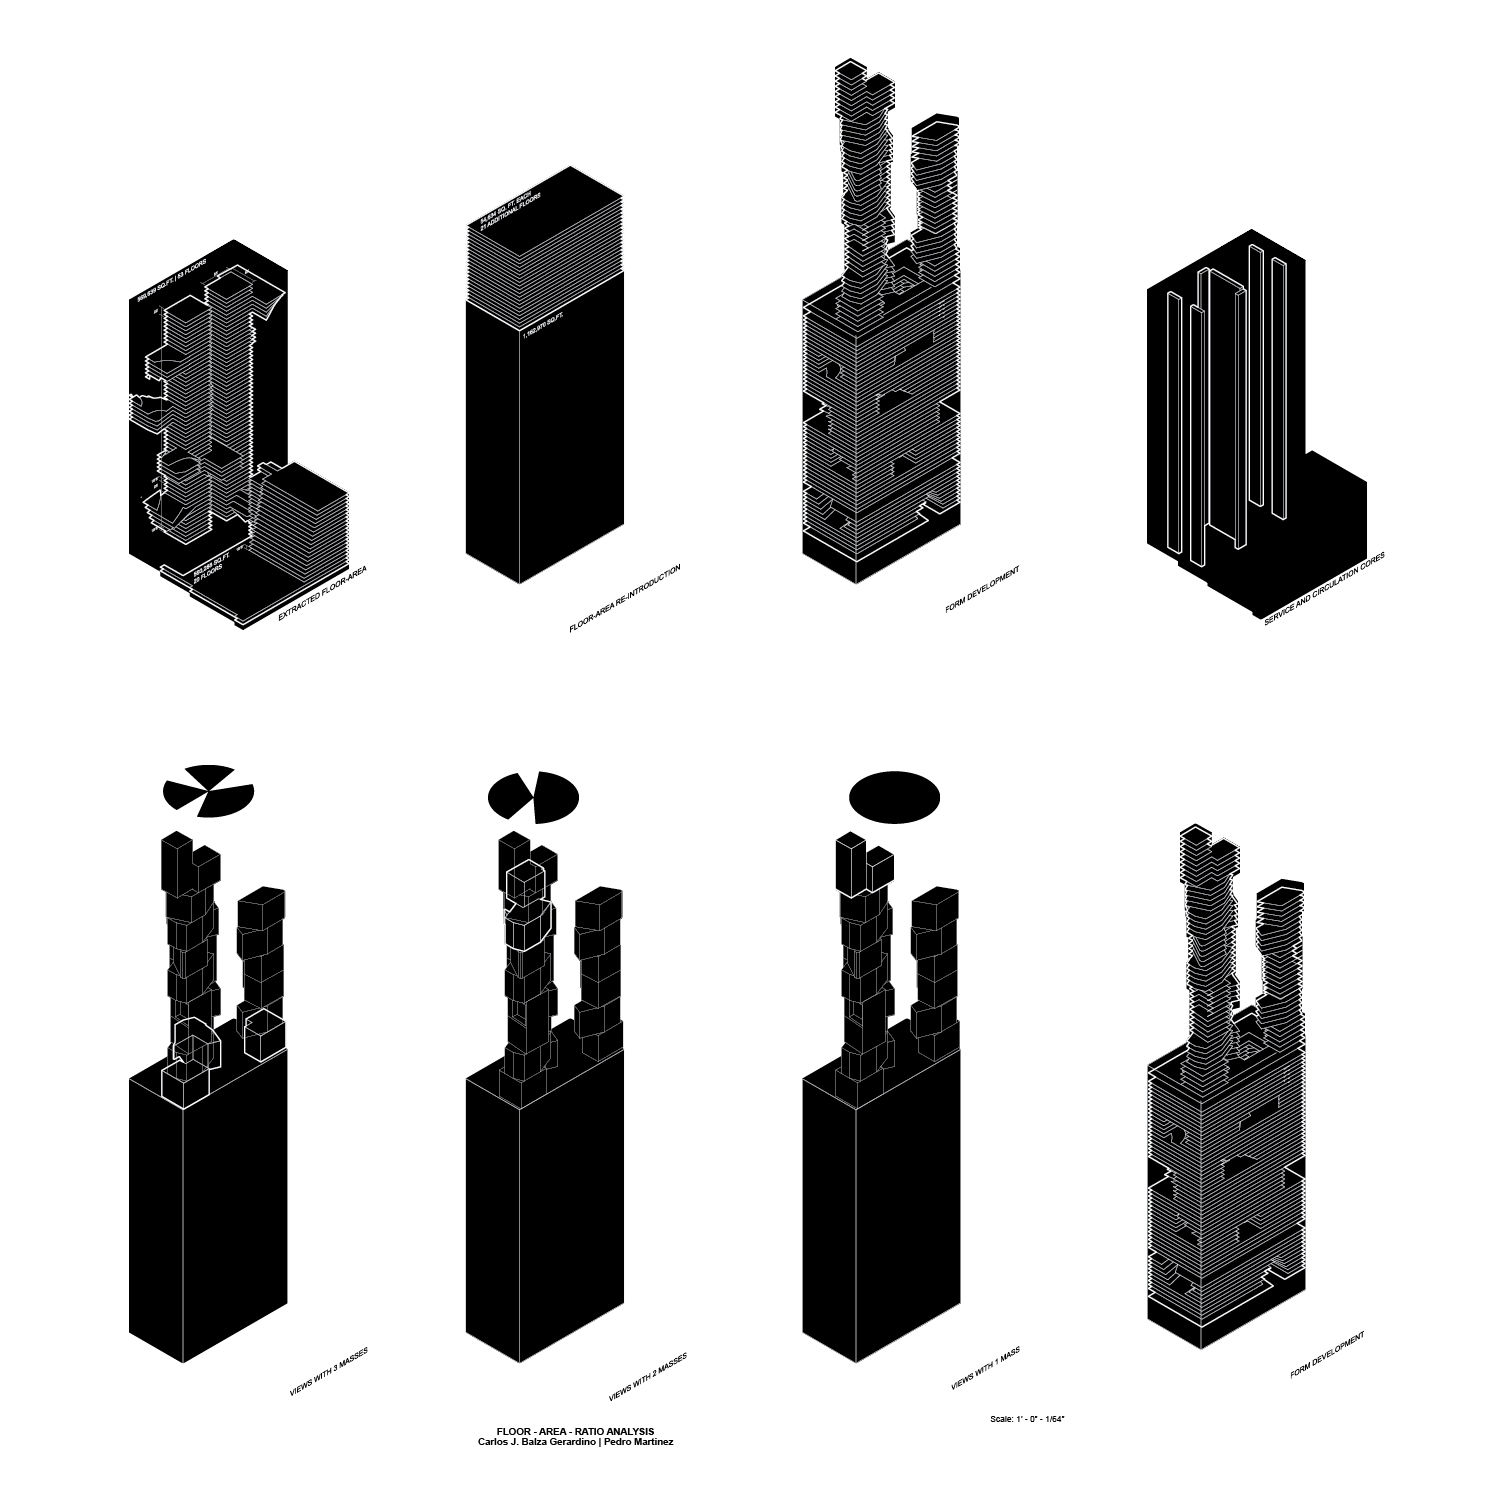 Monochrome renders of structure and variations.